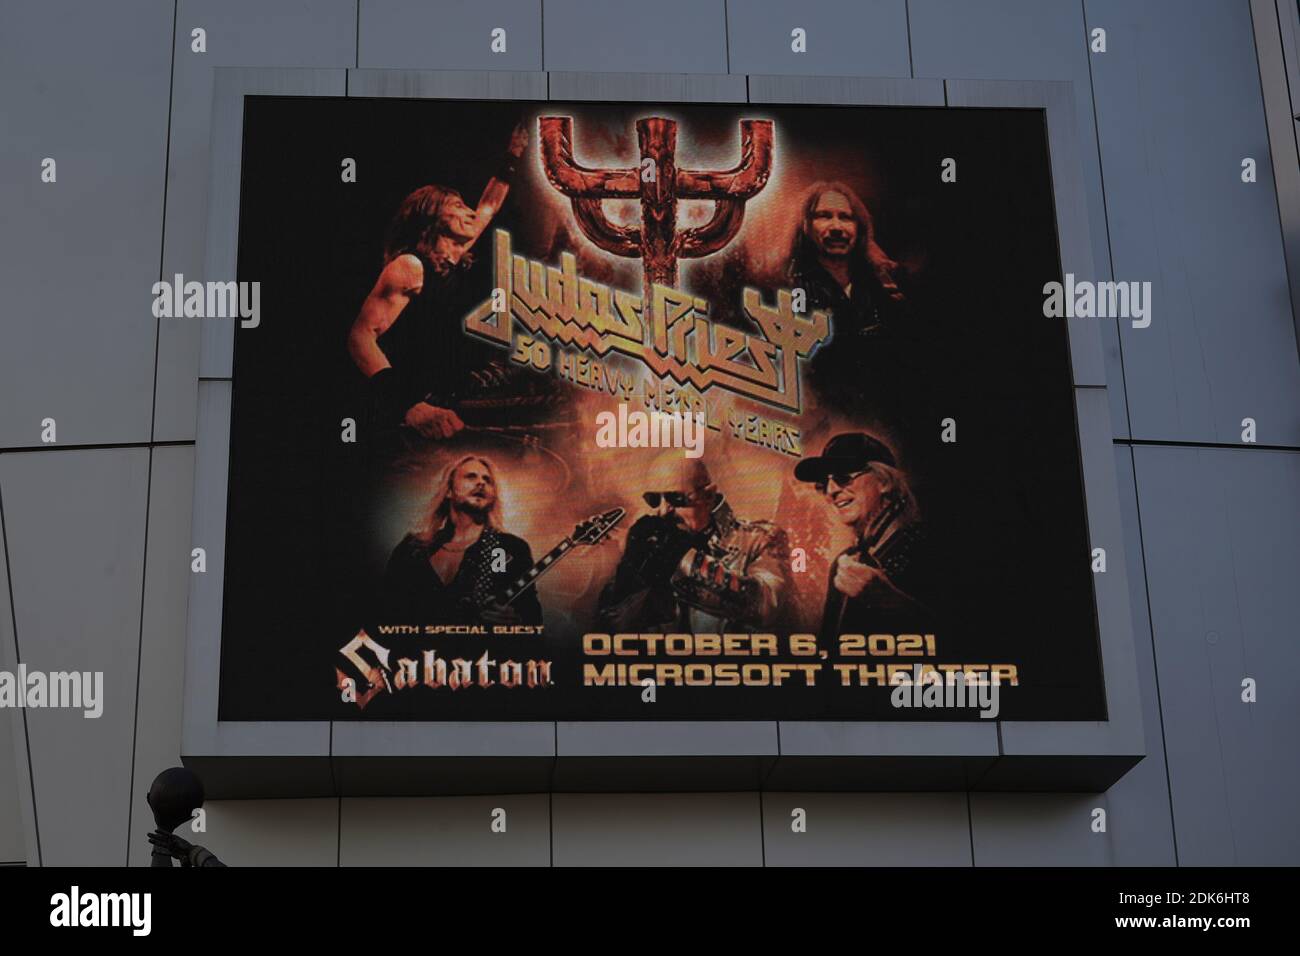 An advertisement for Judas Priest concert at the Microsoft Theater at the Staples Center, Monday, Dec. 14, 2020, in Los Angeles. Stock Photo